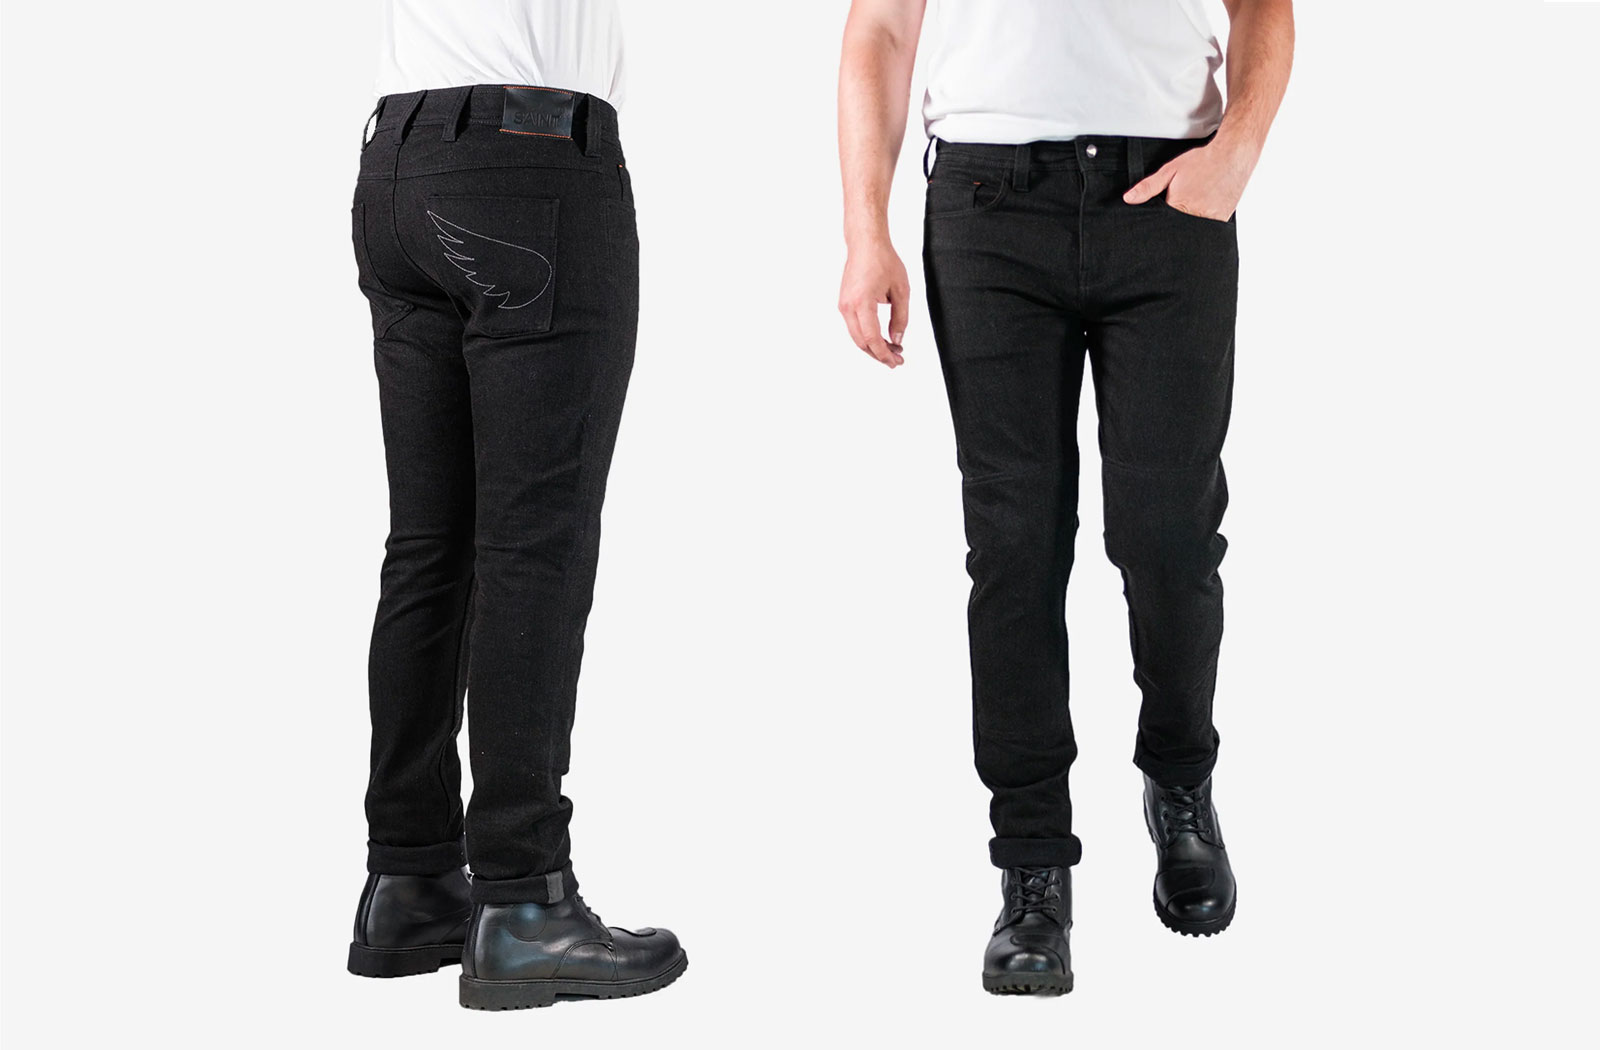 Saint Engineered Armoured Jeans review